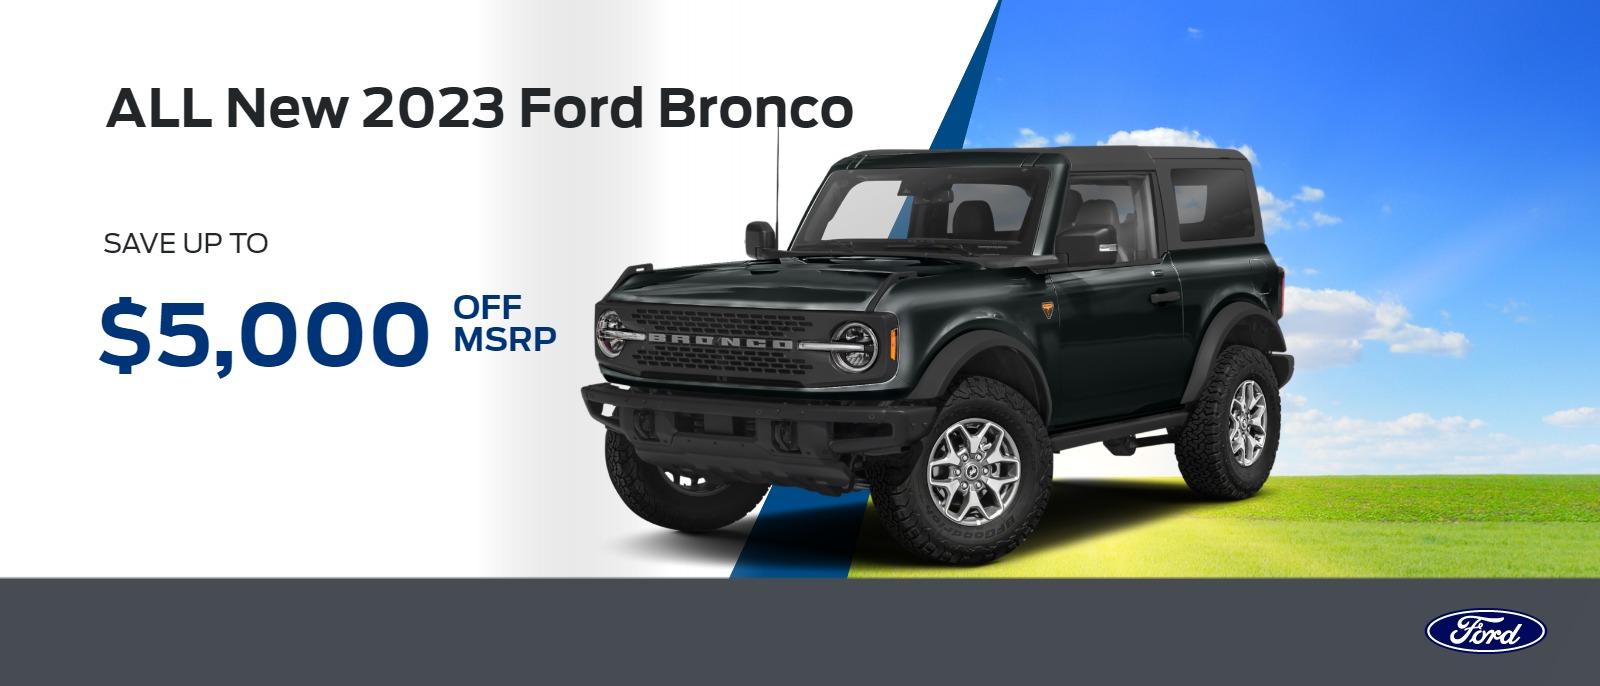 New 2023 Ford Bronco Save up to $5,000 OFF MSRP